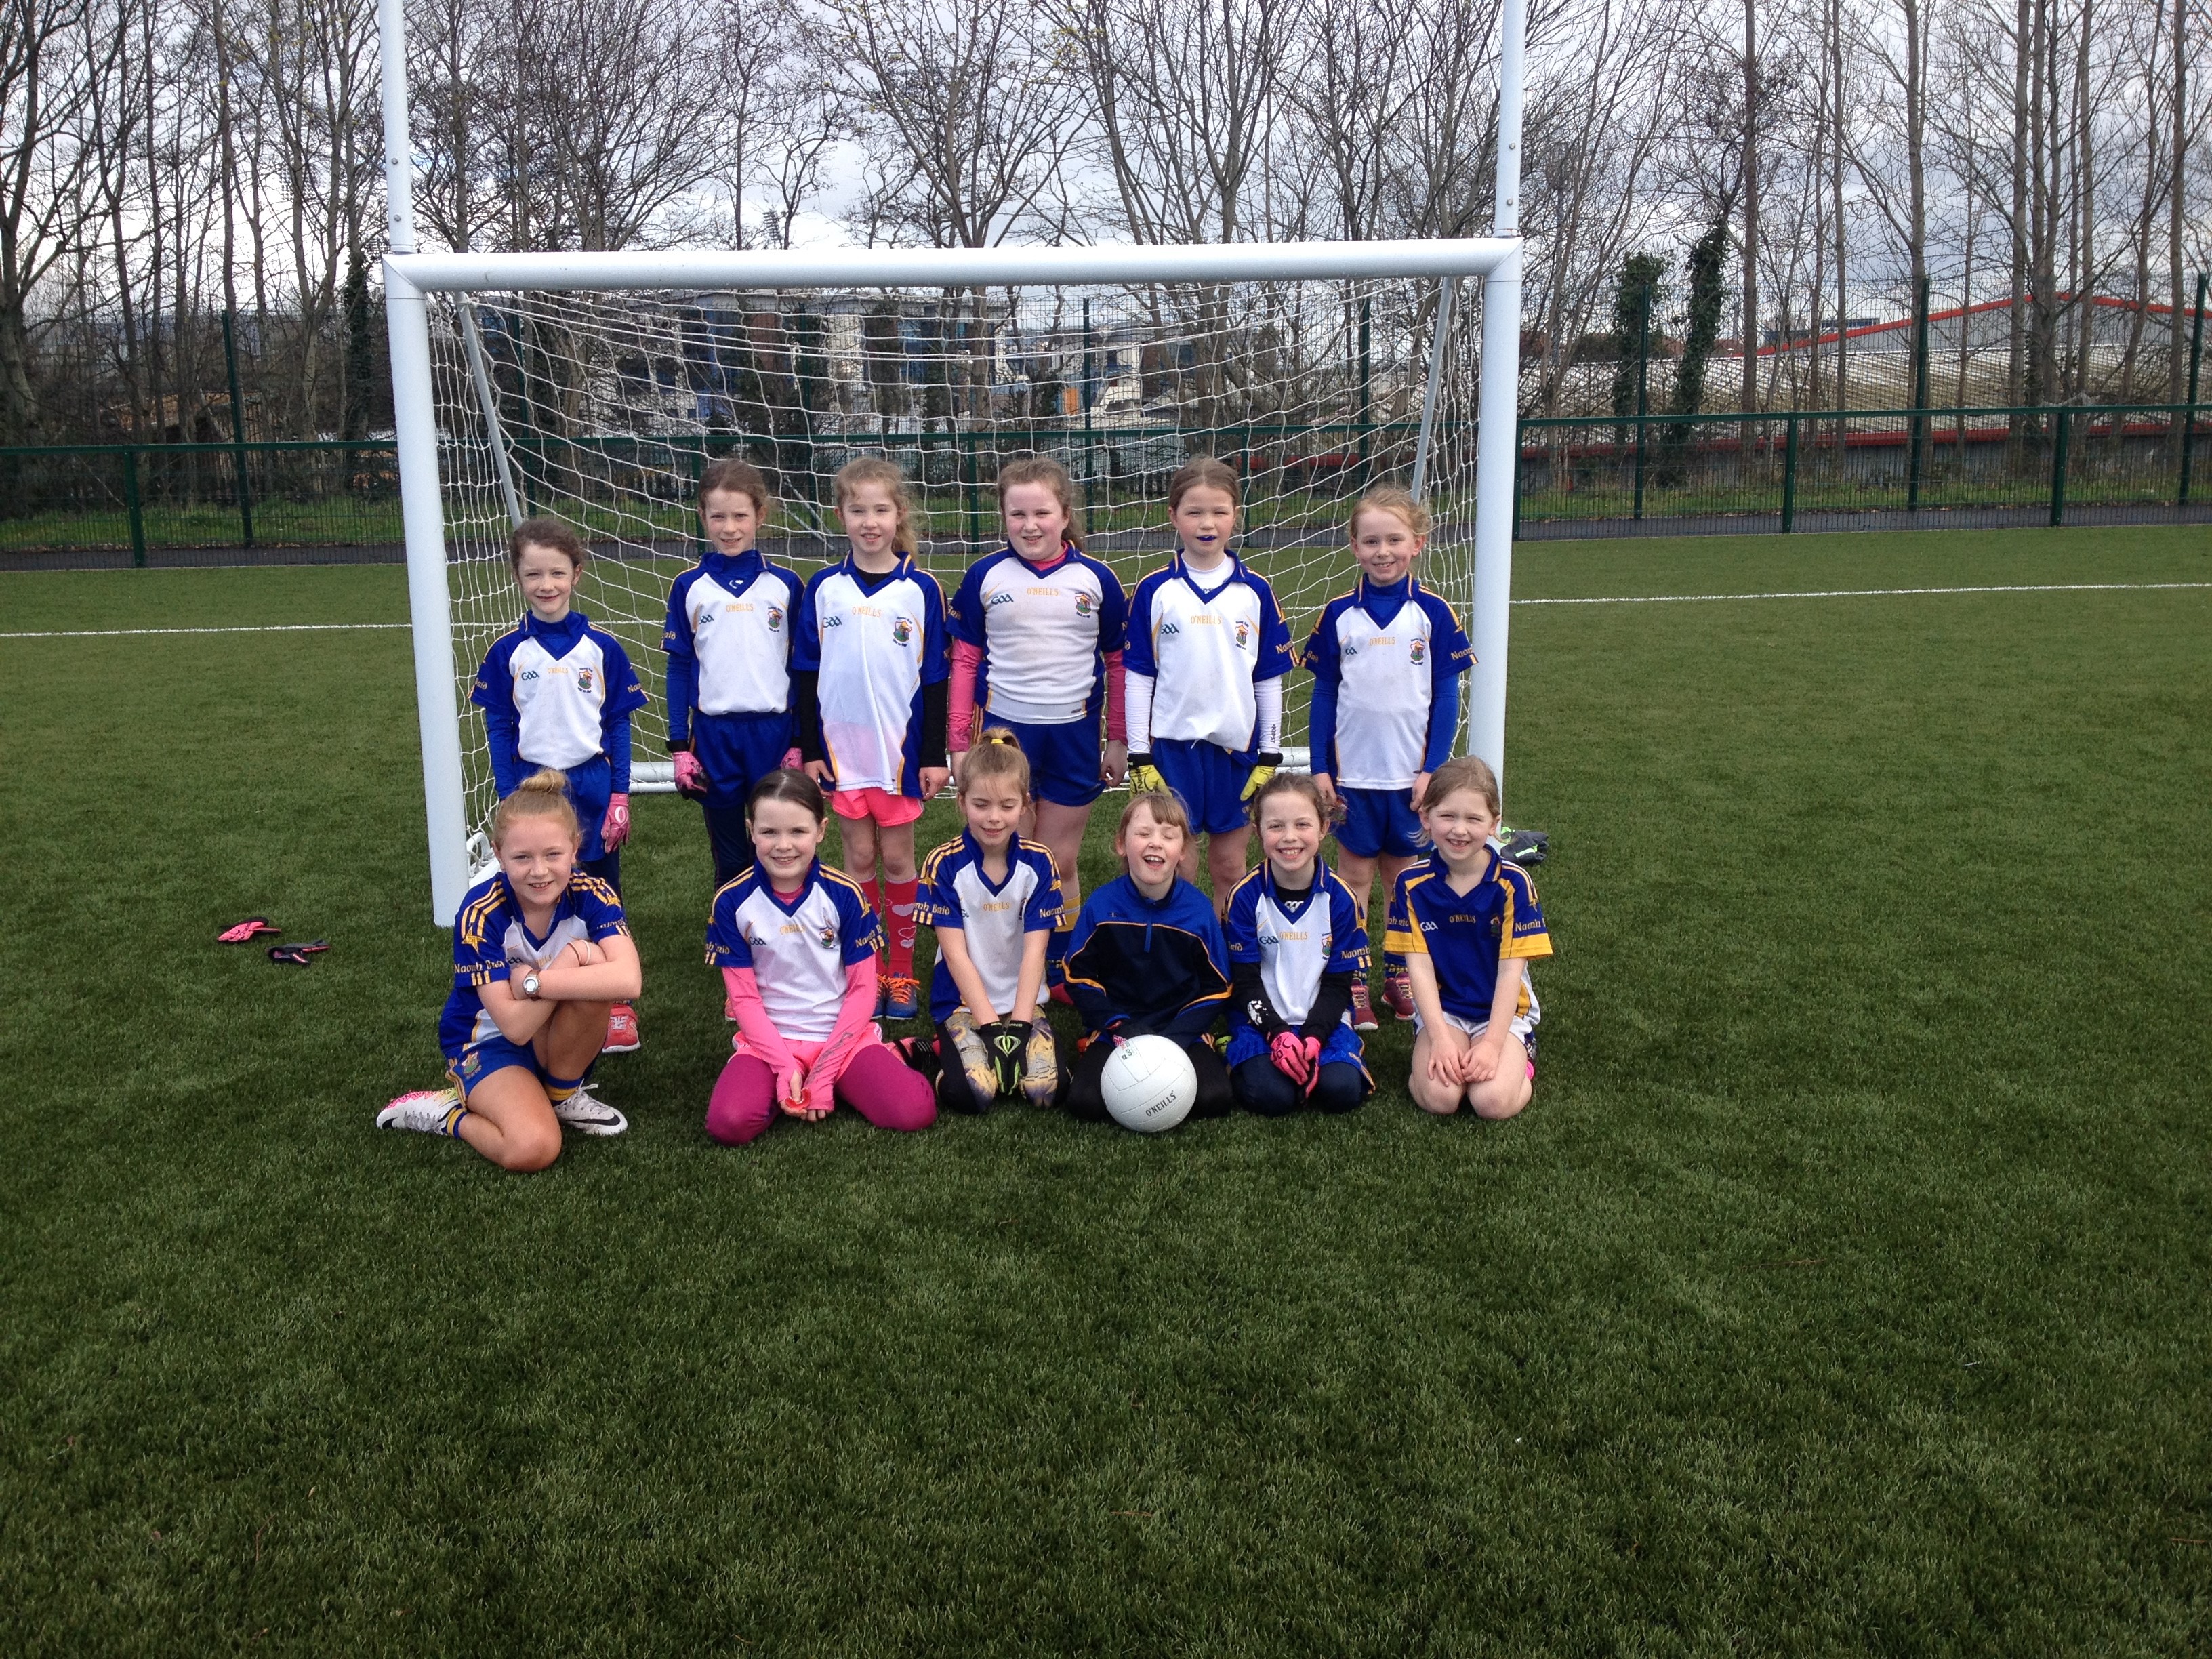 U10 Girls Continue their winning ways at Blitz. Well done to the U10 Girls who won all three games at the recent Blitz and remain undefeated in all three Blitz’s this year.